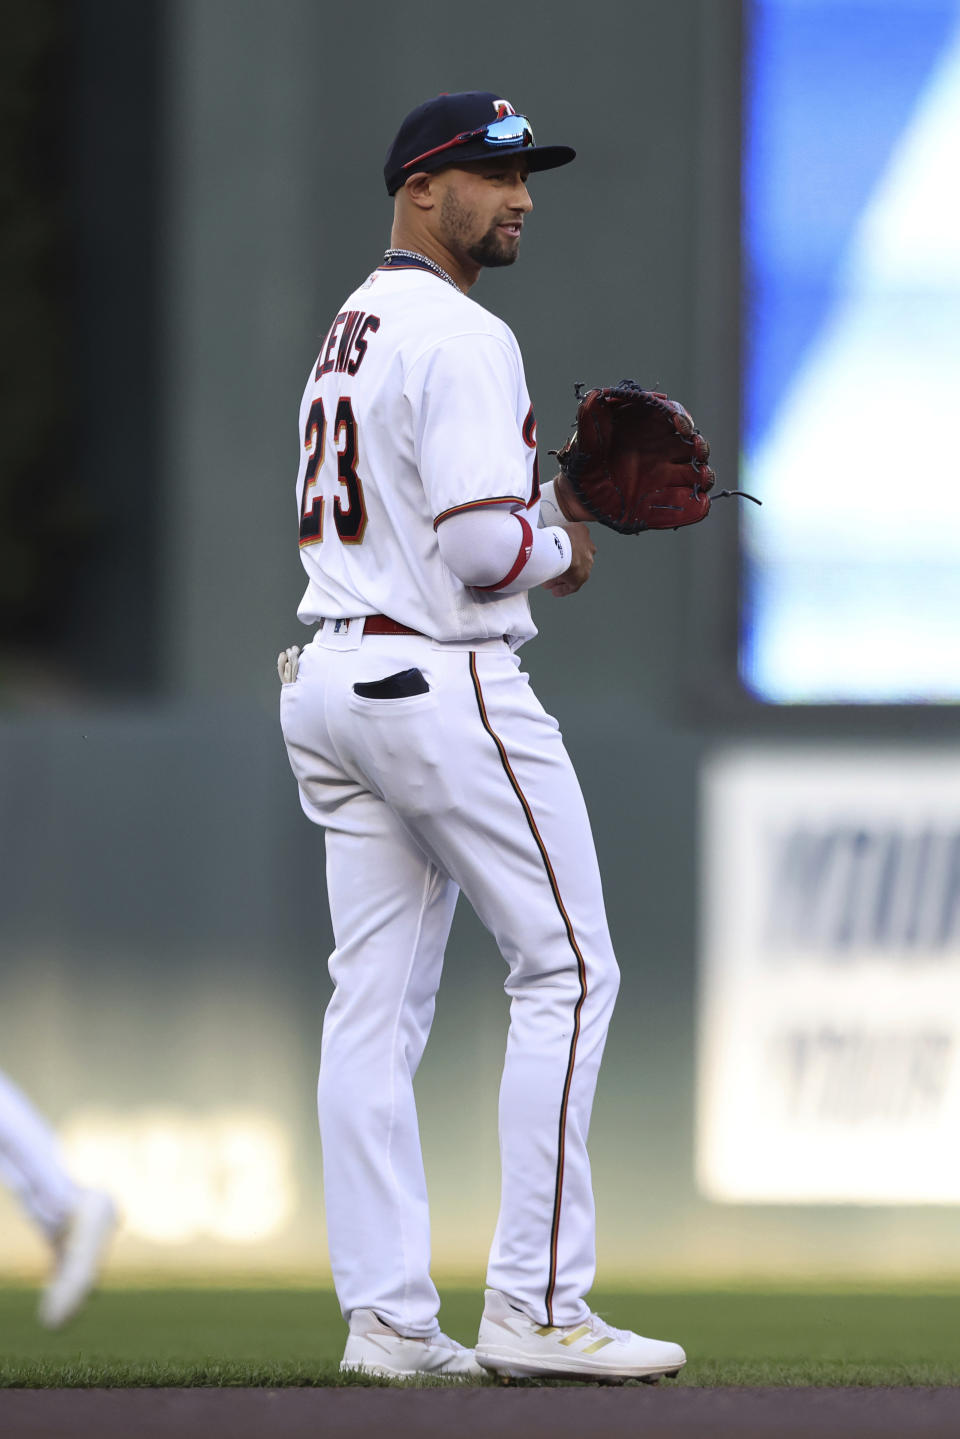 Minnesota Twins shortstop Royce Lewis warms up for the team's baseball game against the Oakland Athletics, Friday, May 6, 2022, in Minneapolis. (AP Photo/Stacy Bengs)